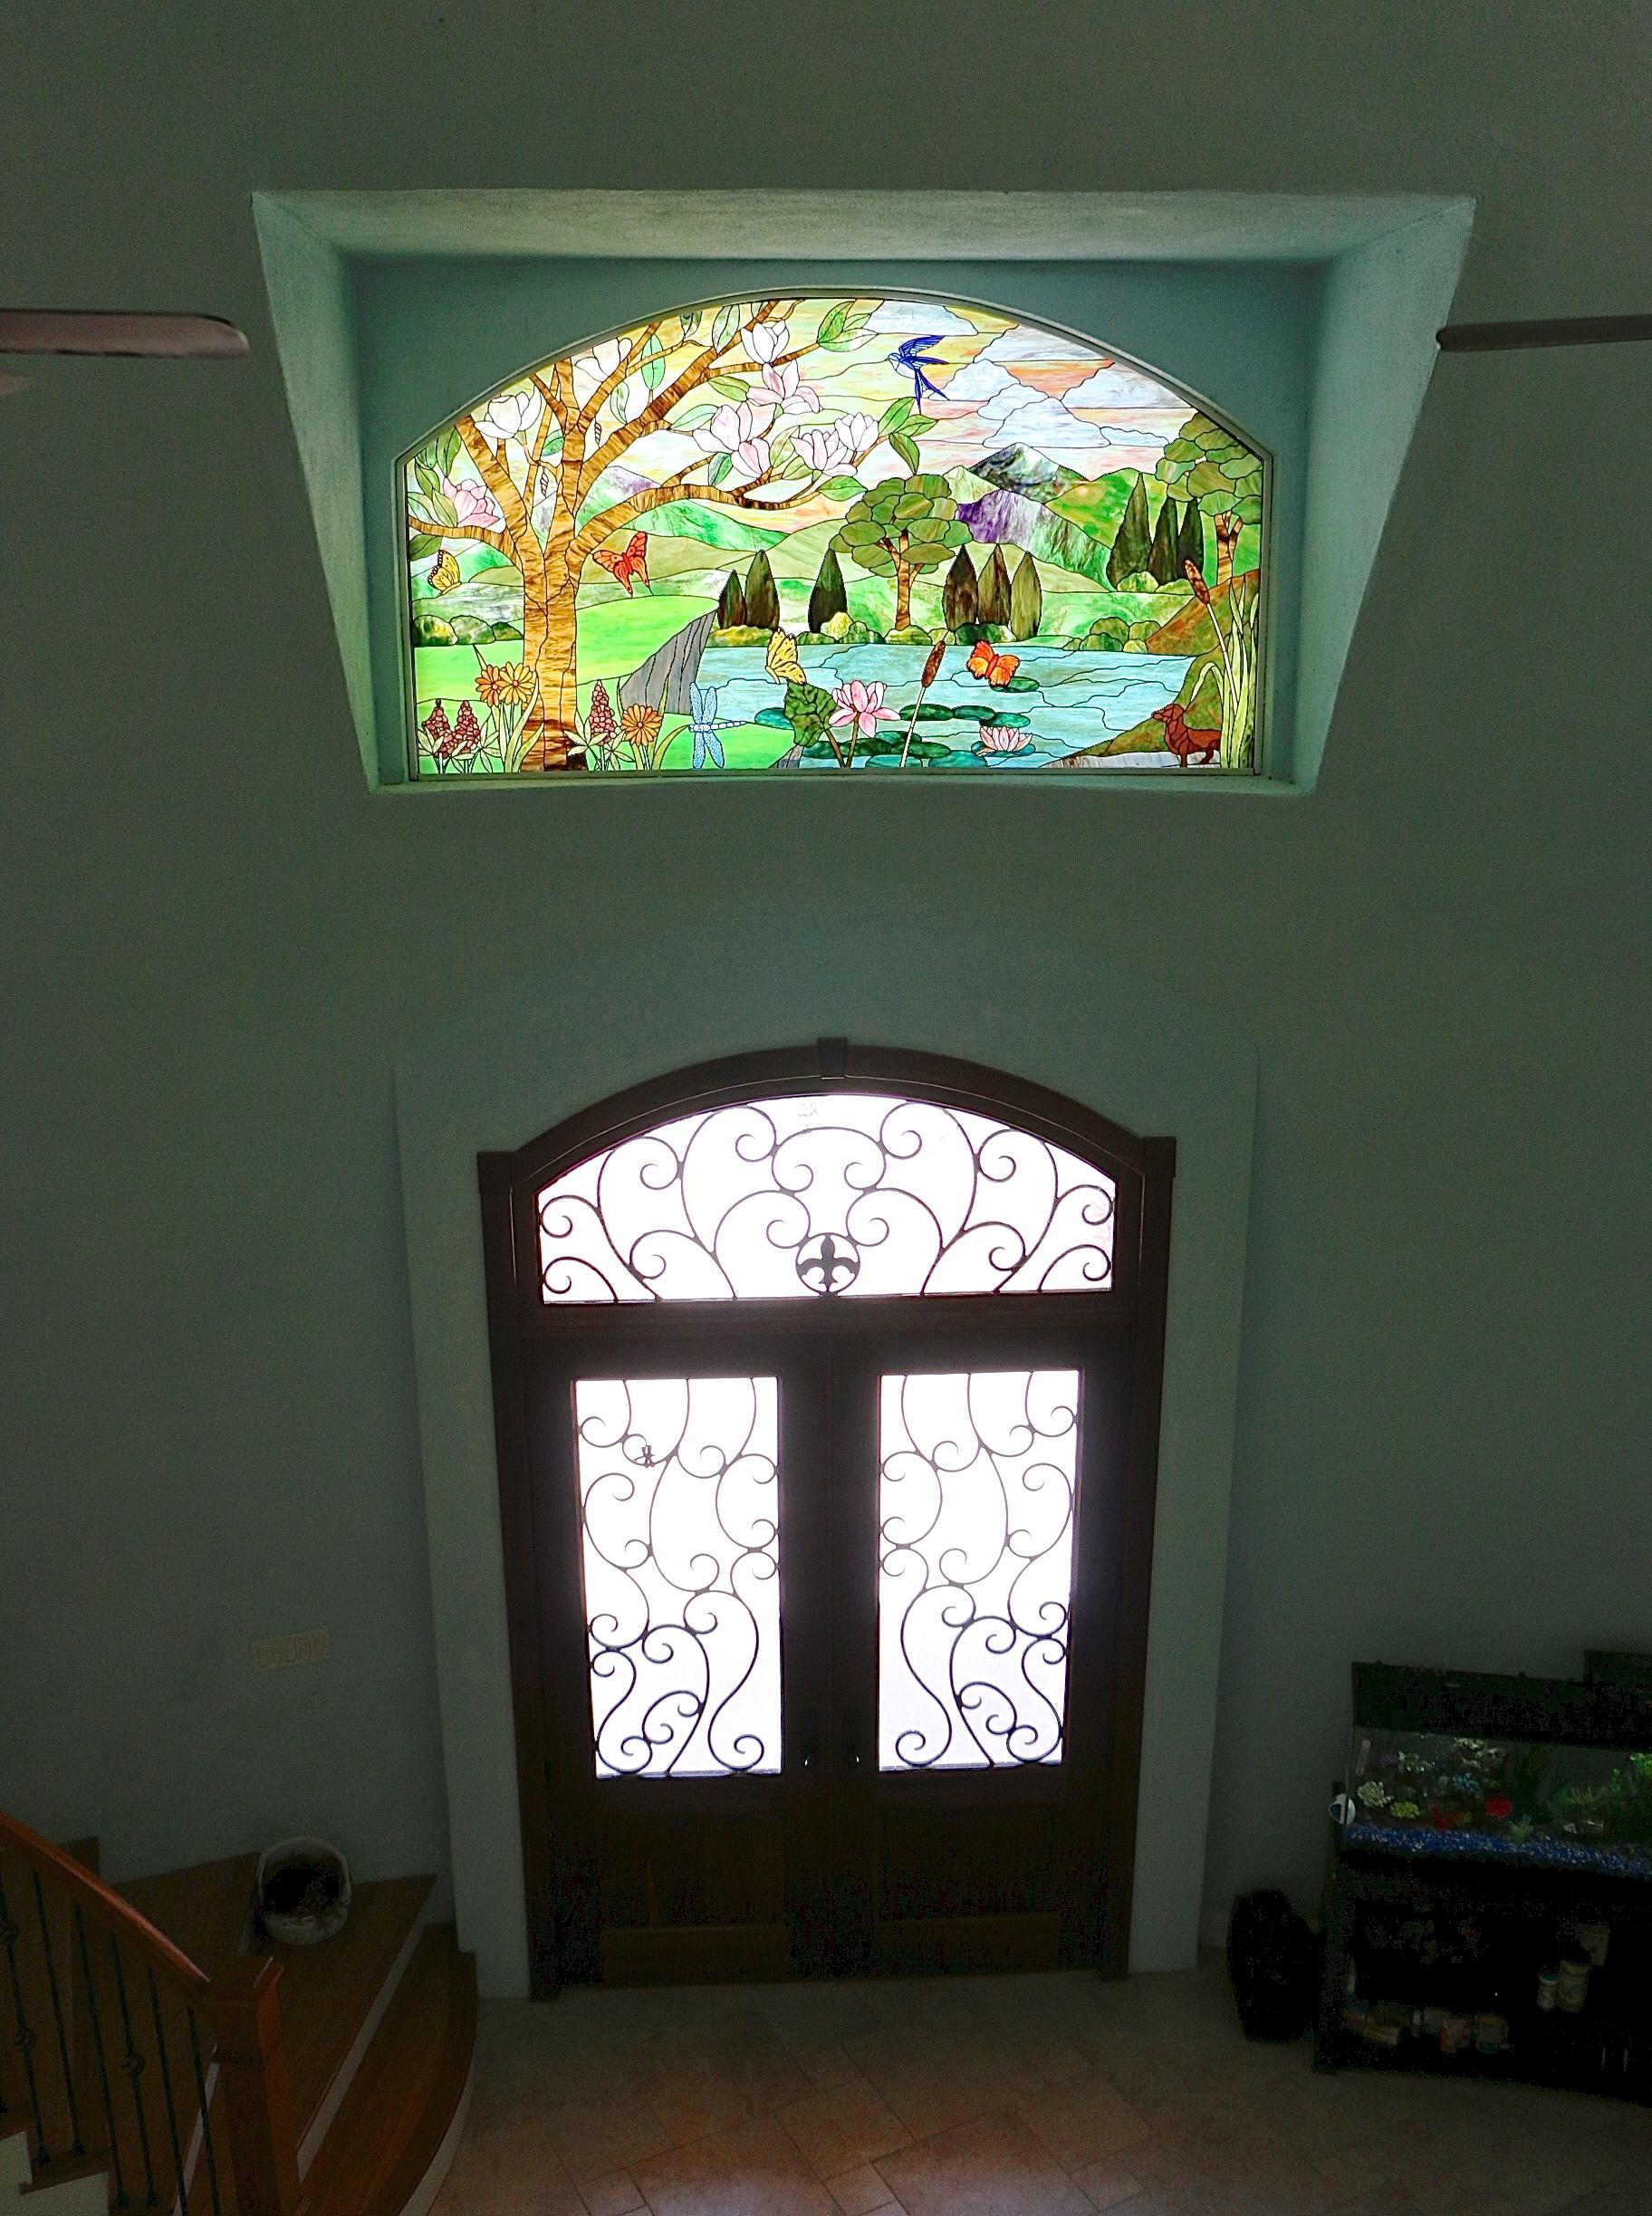 Stained glass window above main entrance.